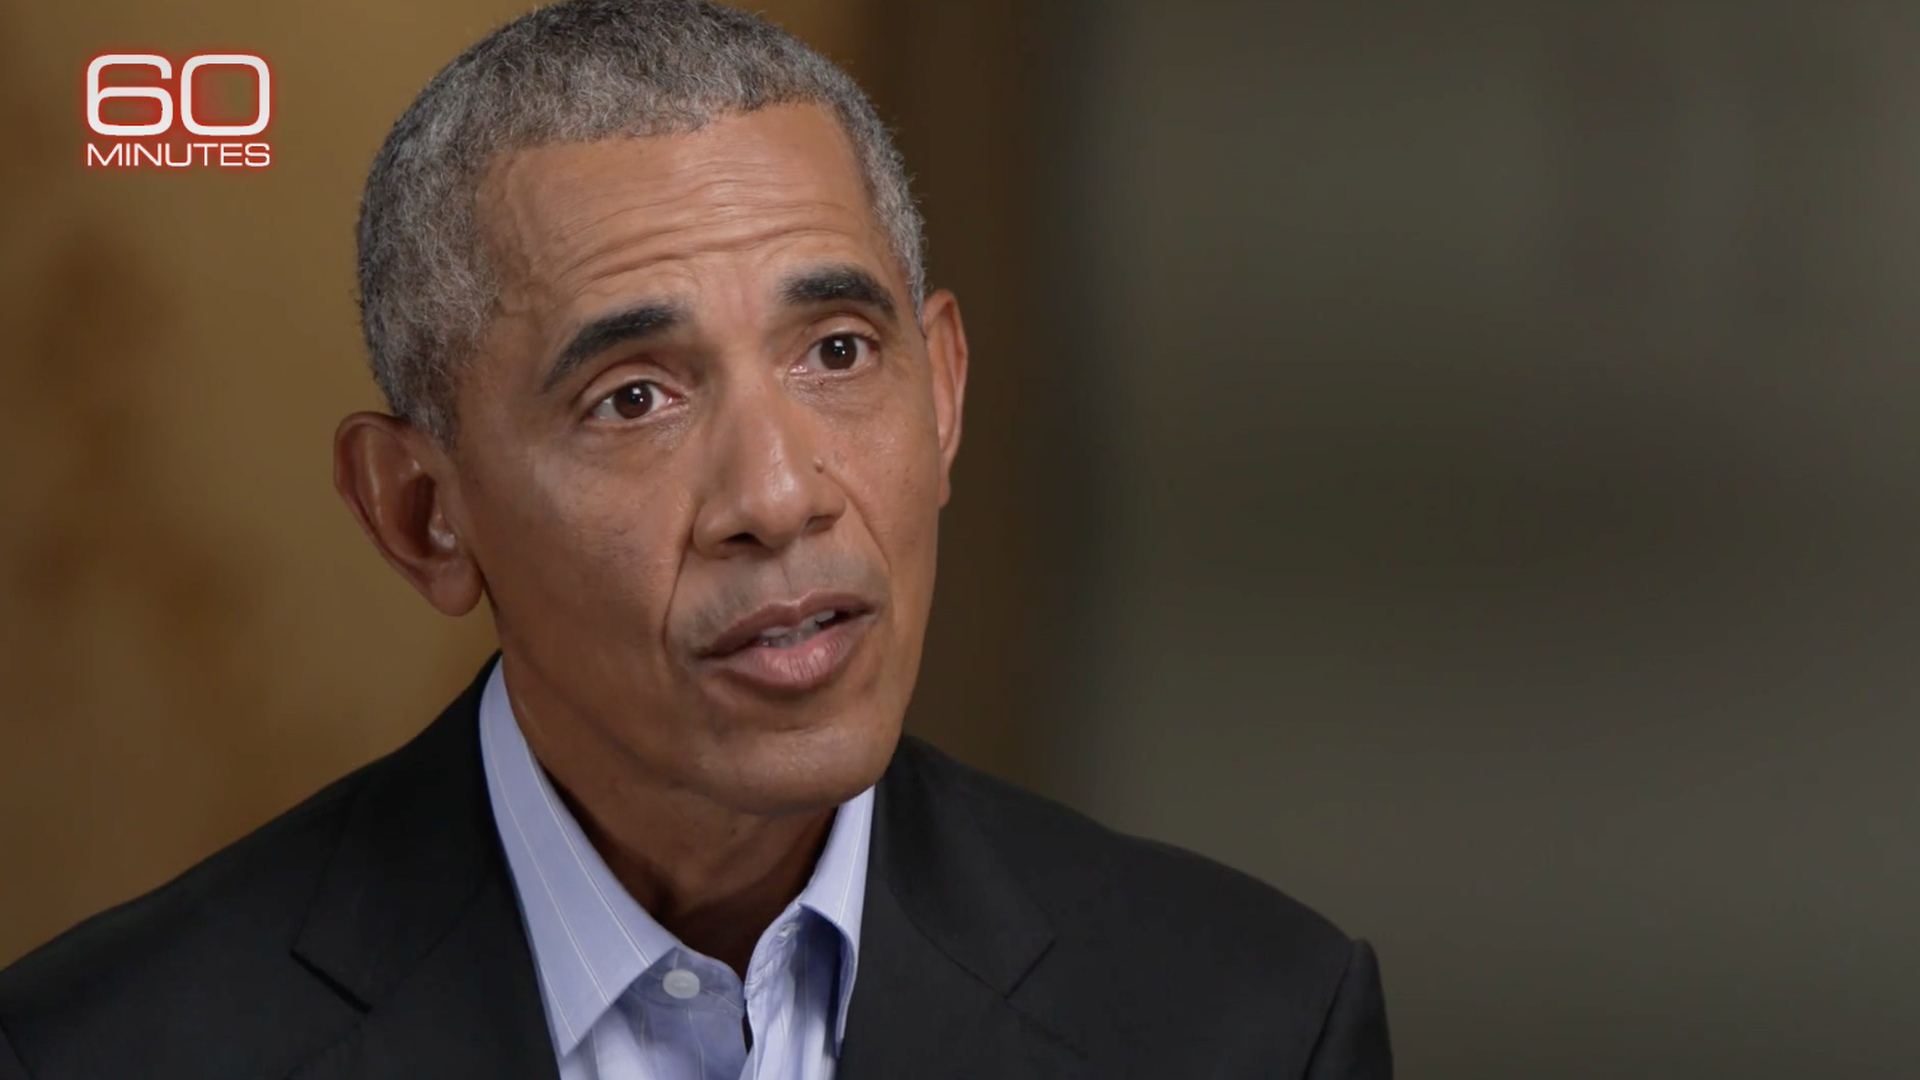 A screenshot from former President Obama's "60 Minutes" interview